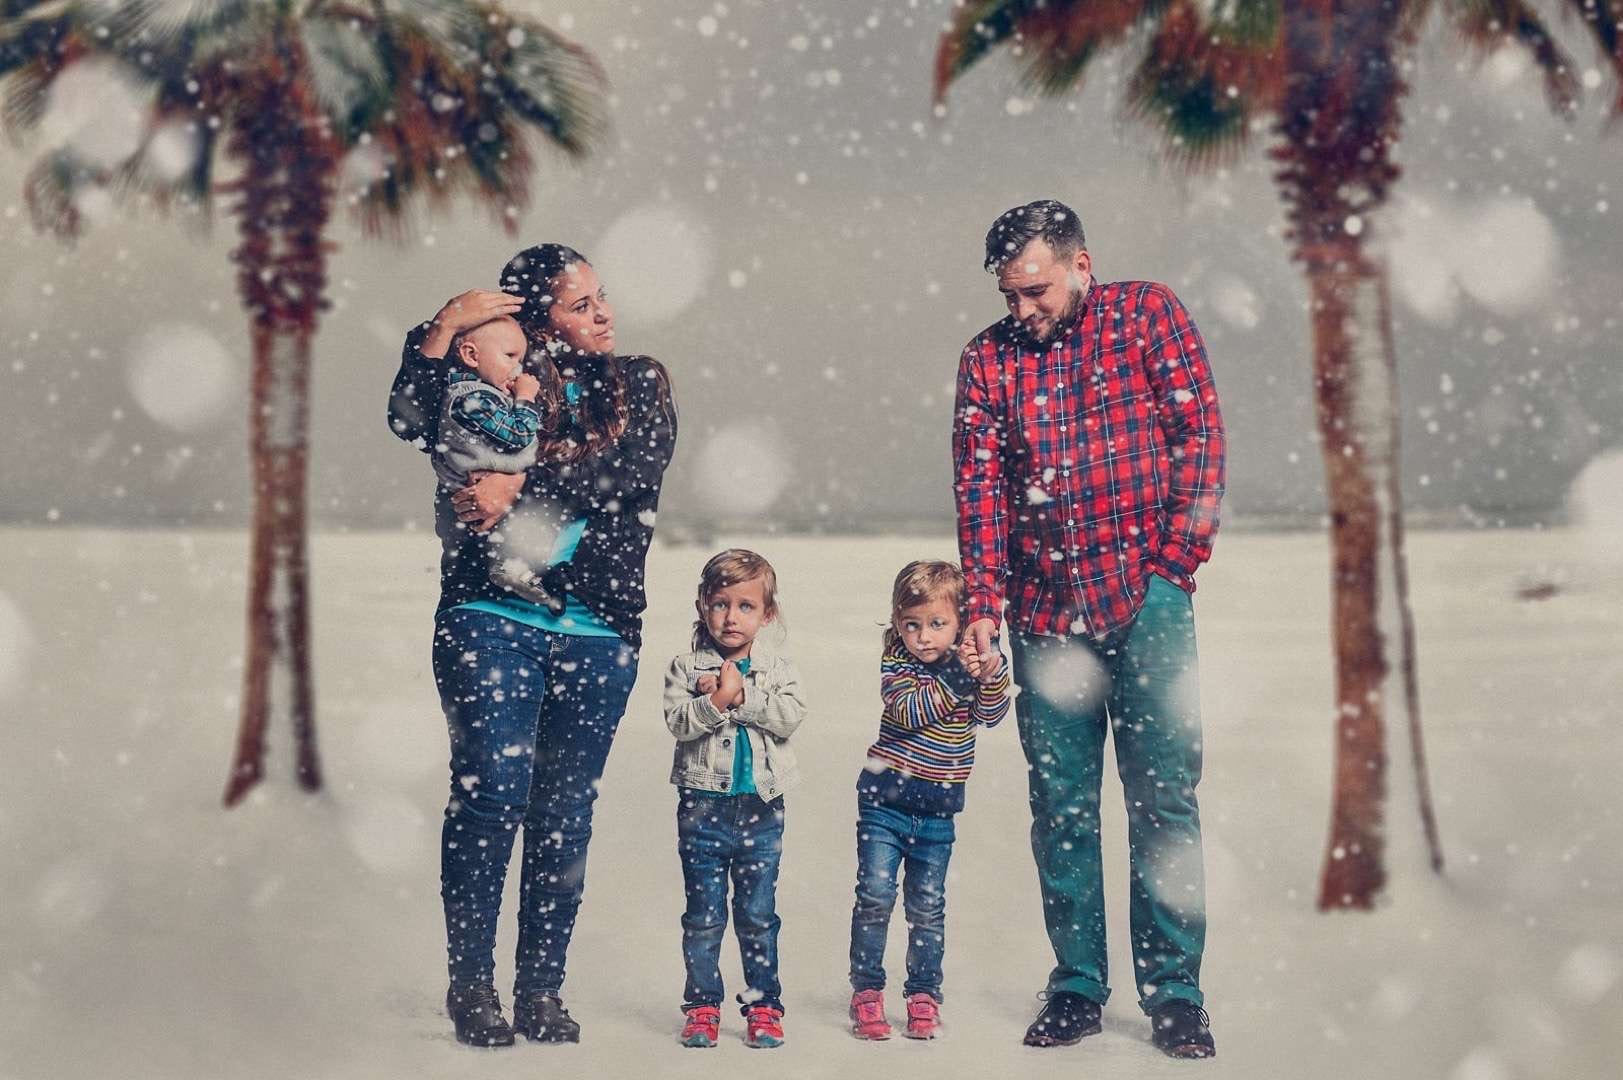 A Series of Unfortunate Family Portraits showing a family with three small children by a beach in the winter with snow falling all looking cold.